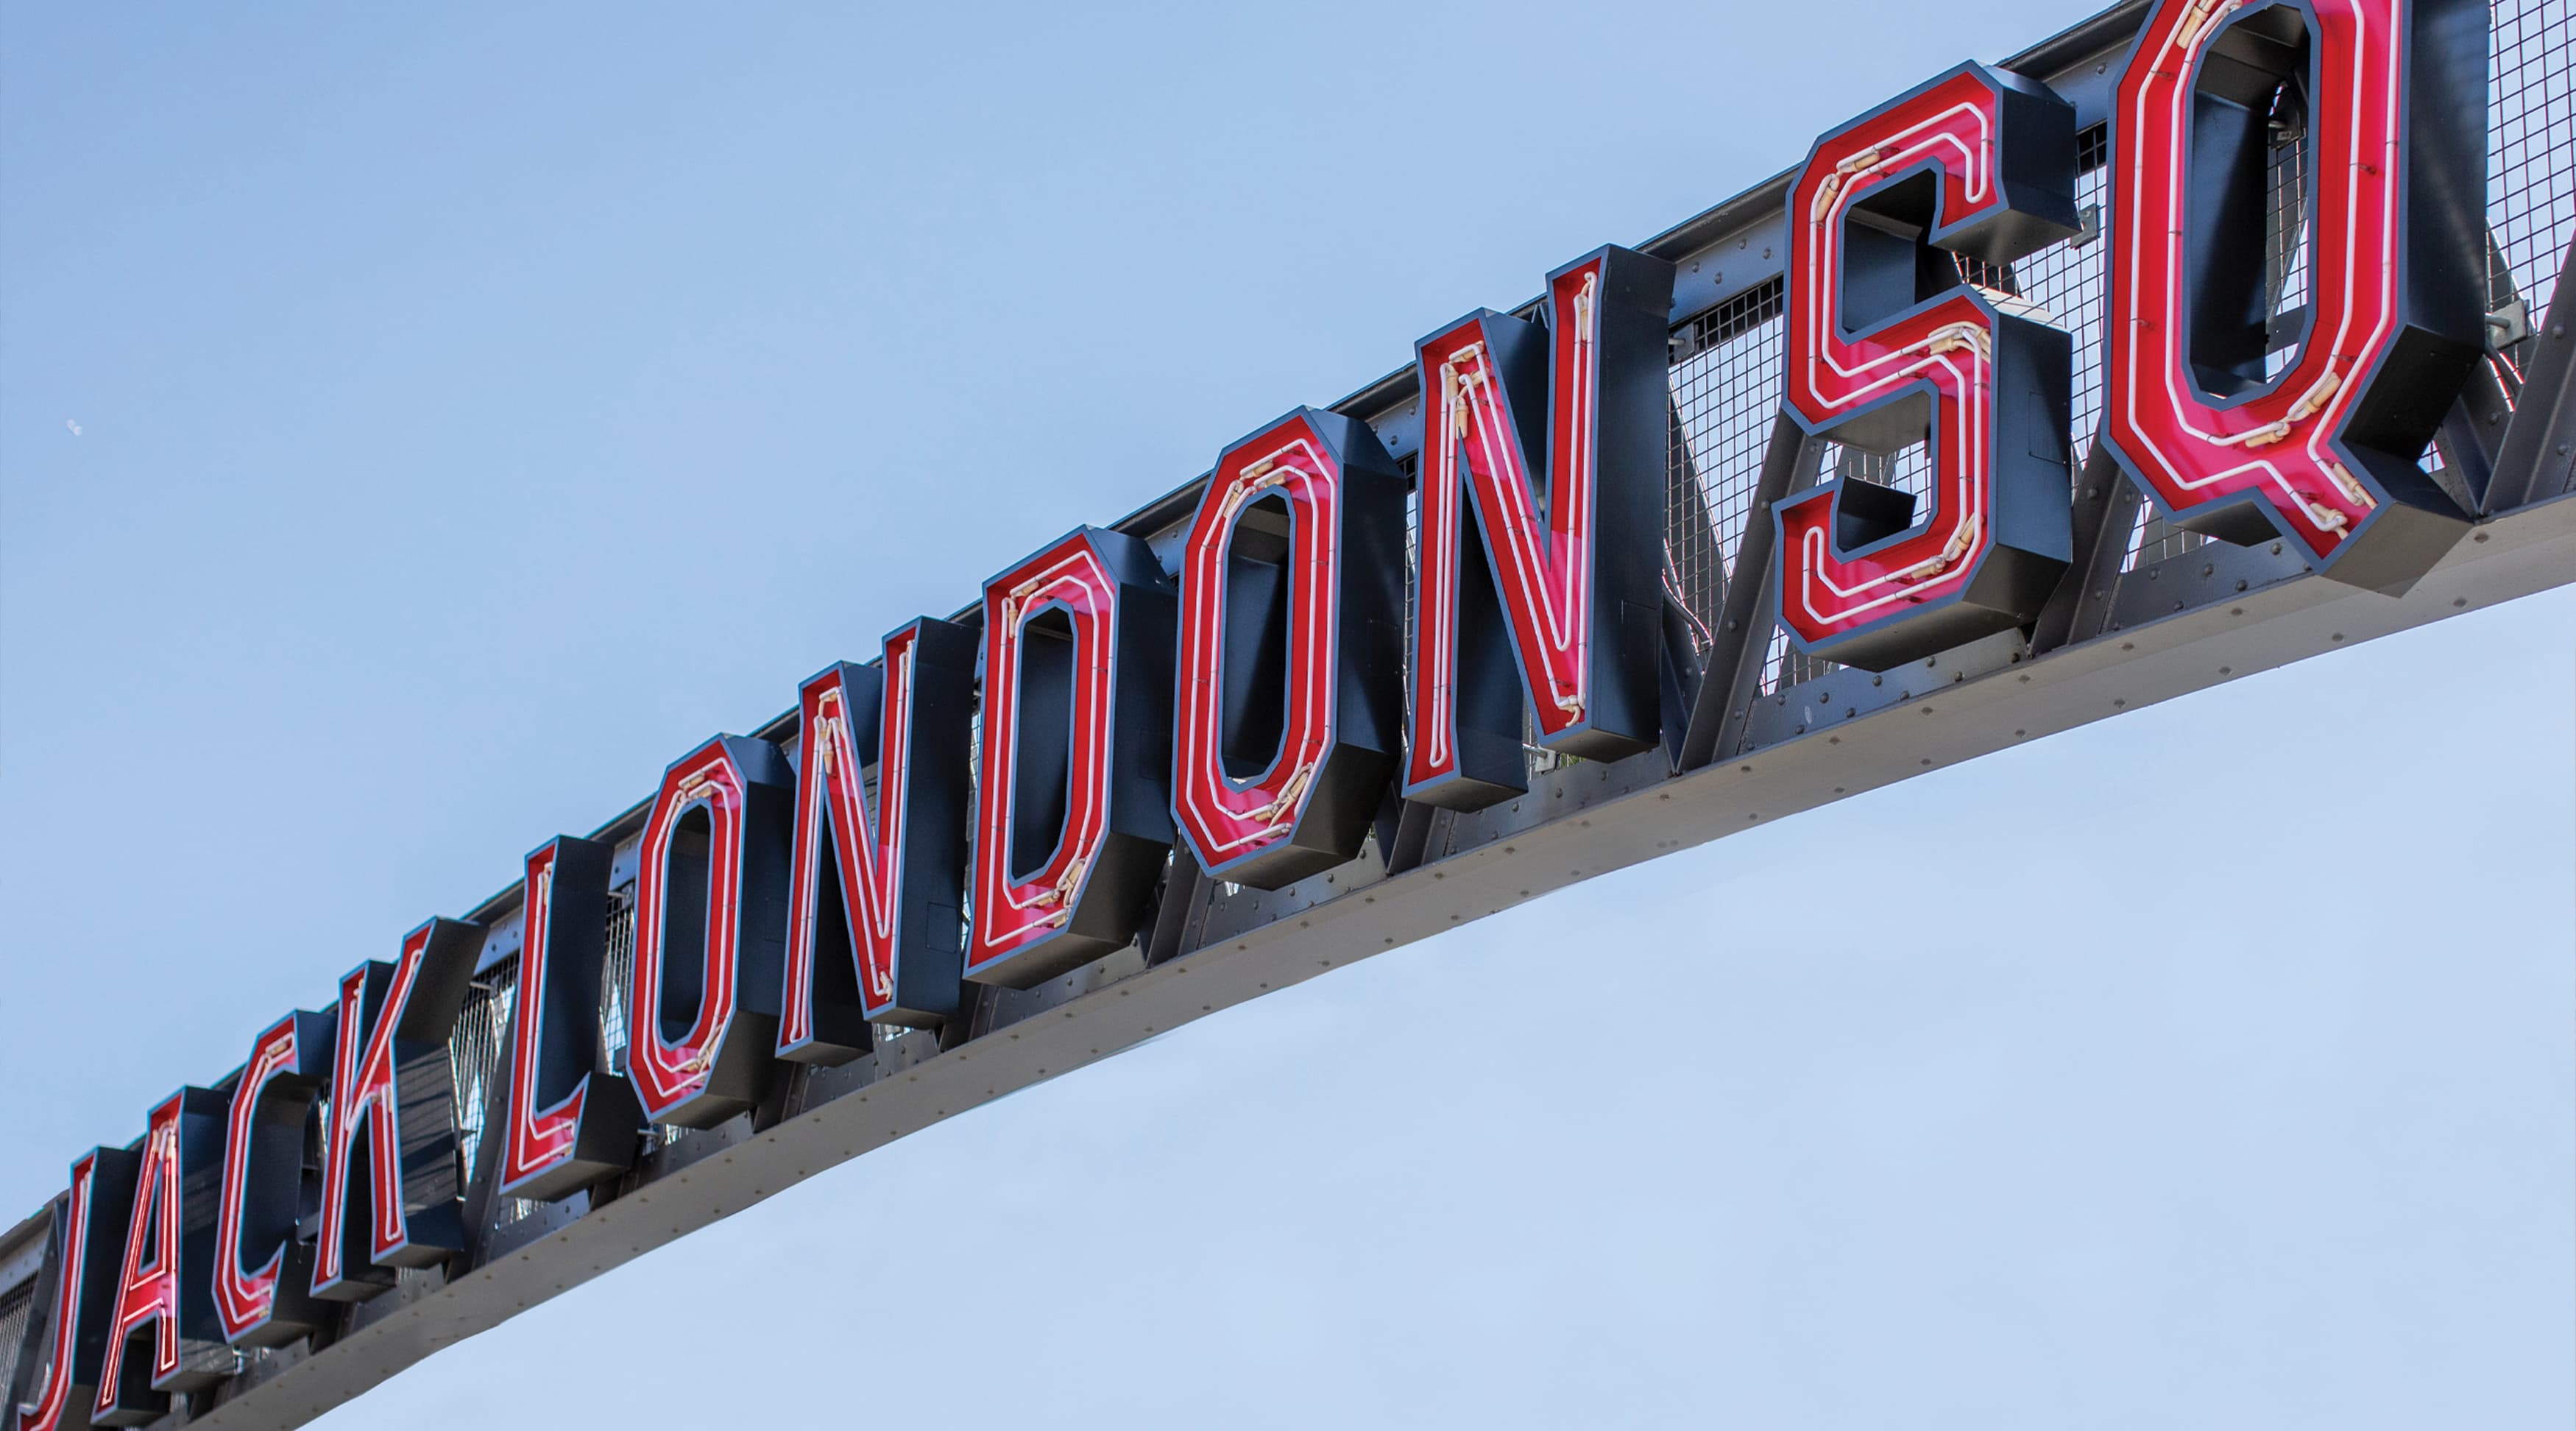 Jack London Square open face channel letters and exposed neon mounted on gateway element